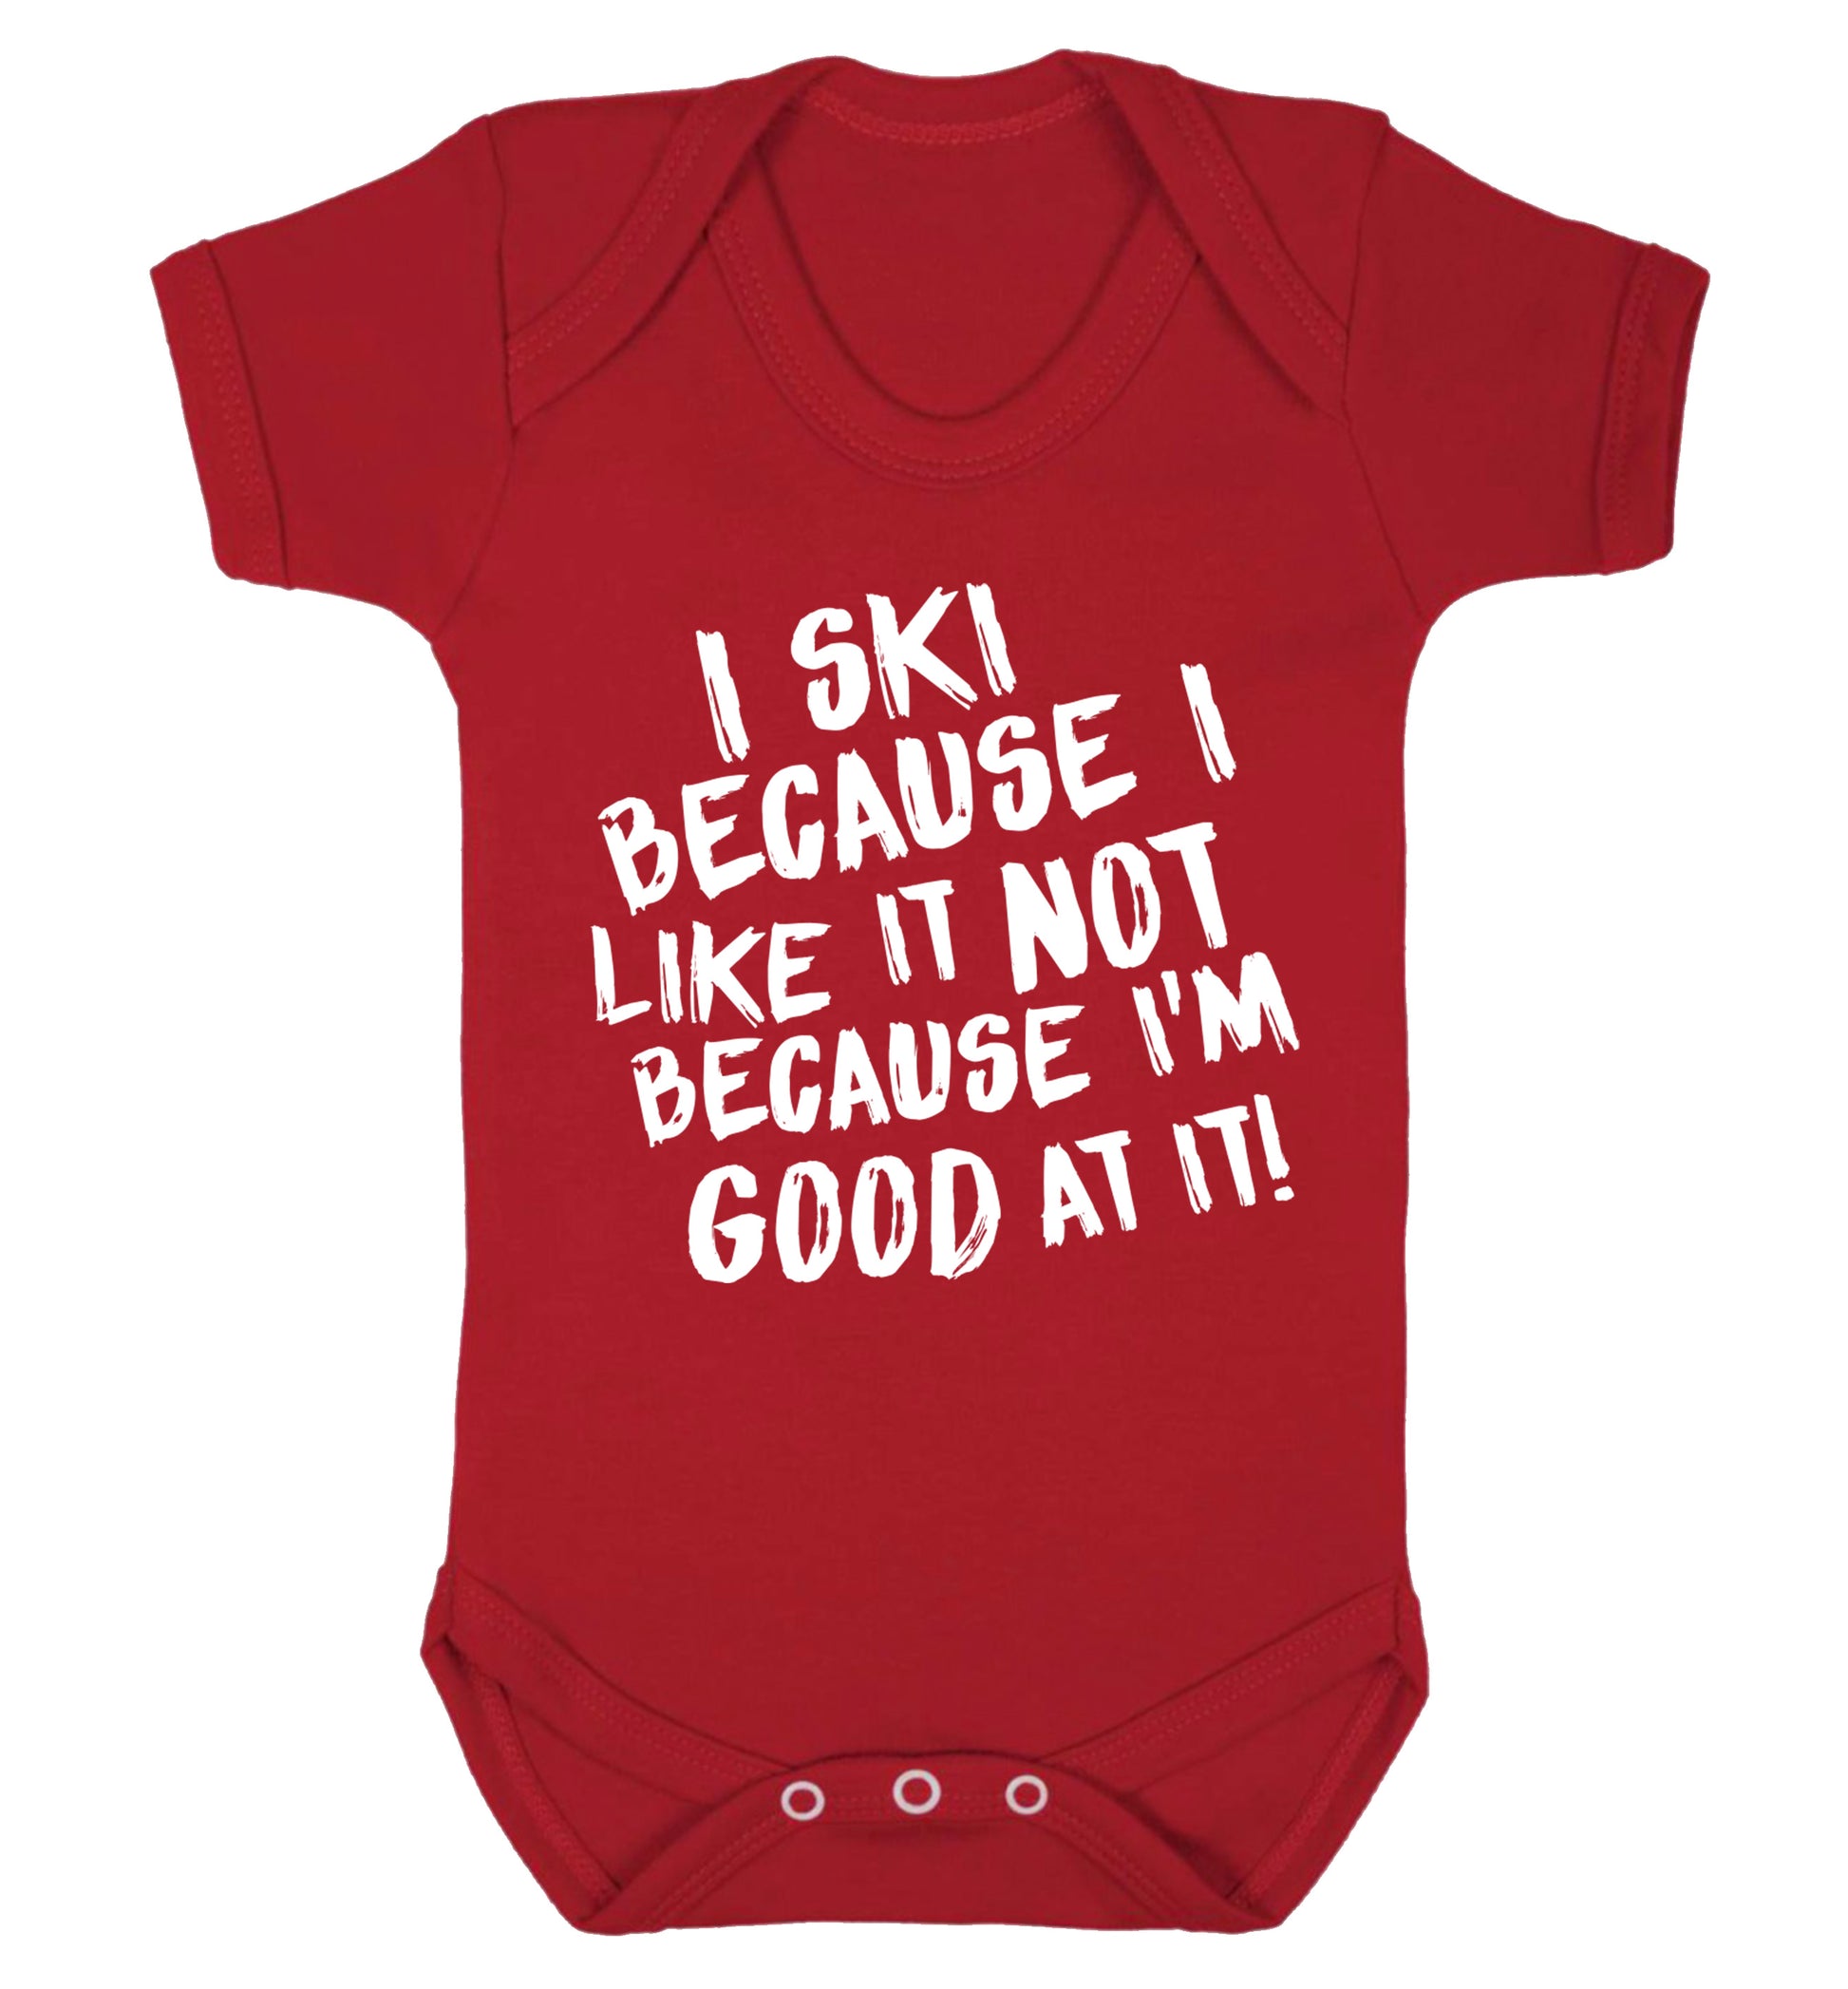 I ski because I like it not because I'm good at it Baby Vest red 18-24 months